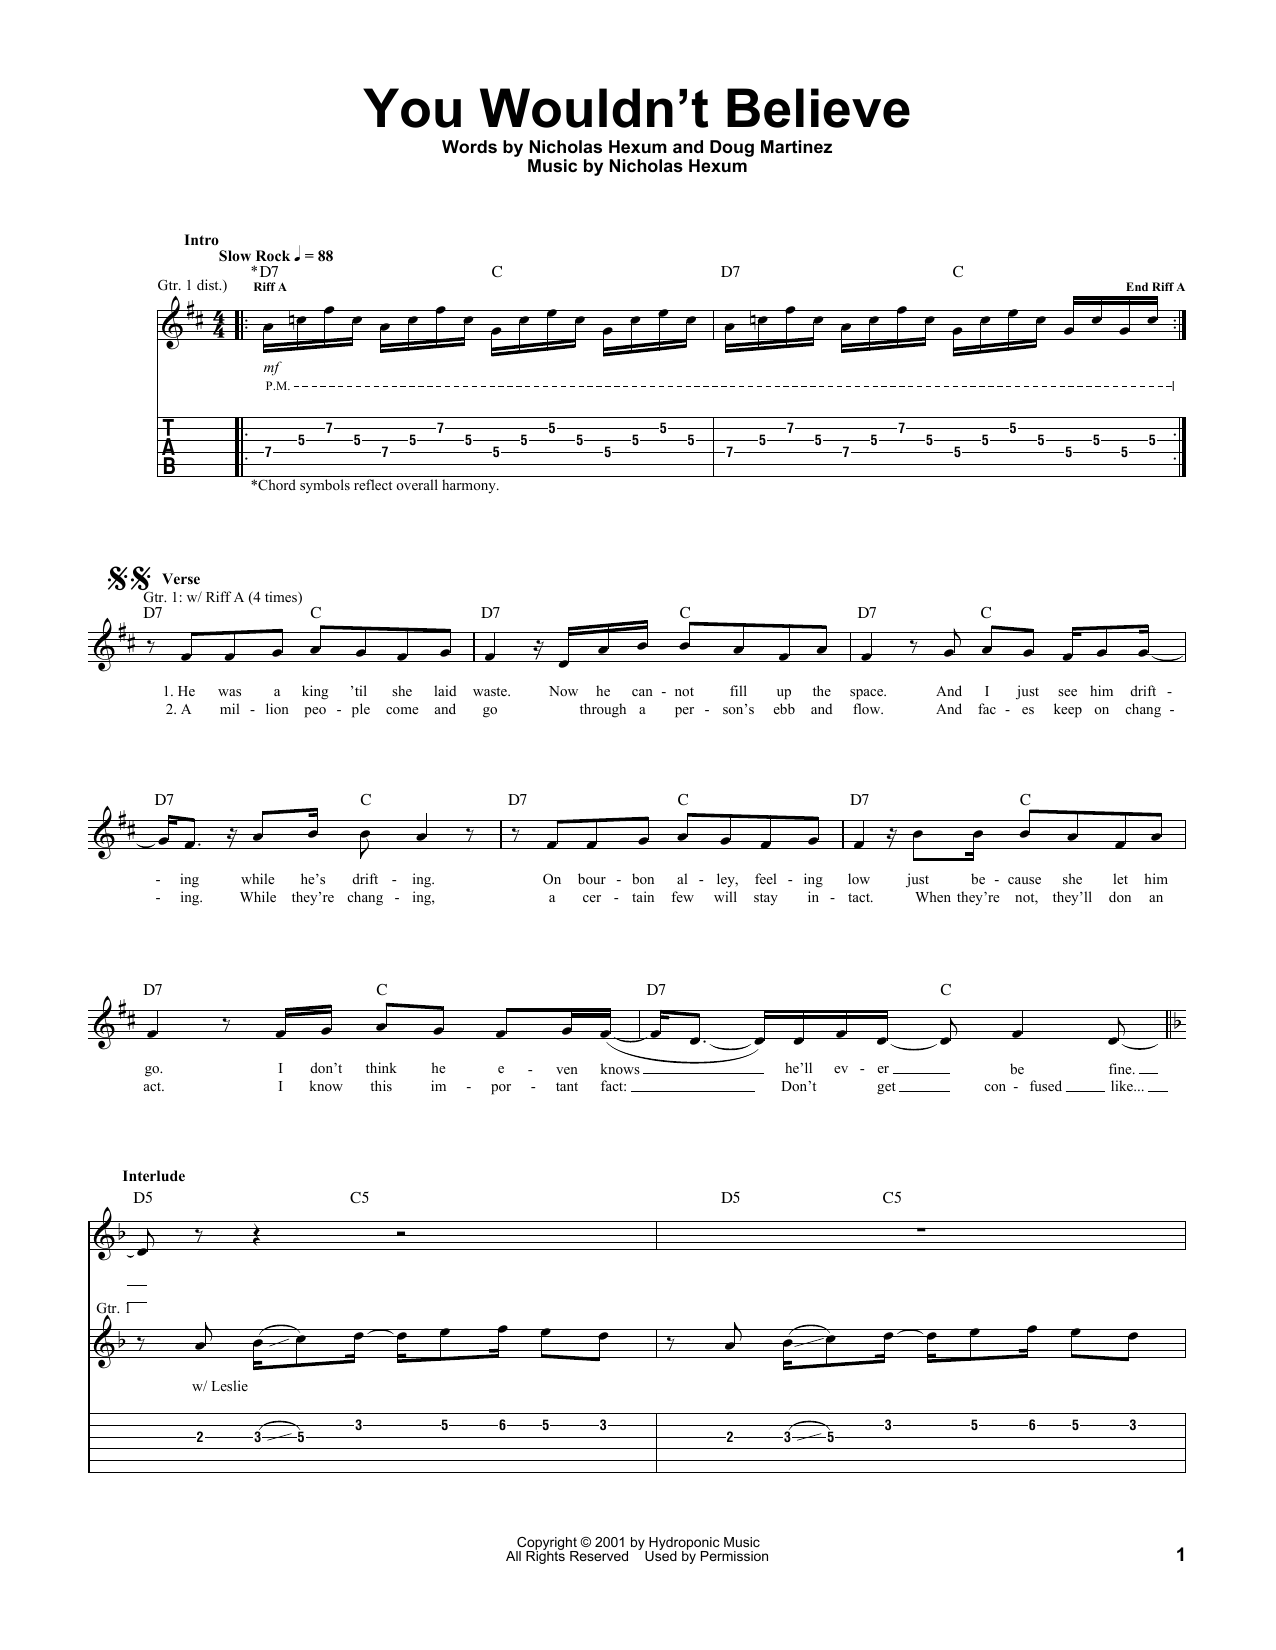 Download 311 You Wouldn't Believe Sheet Music